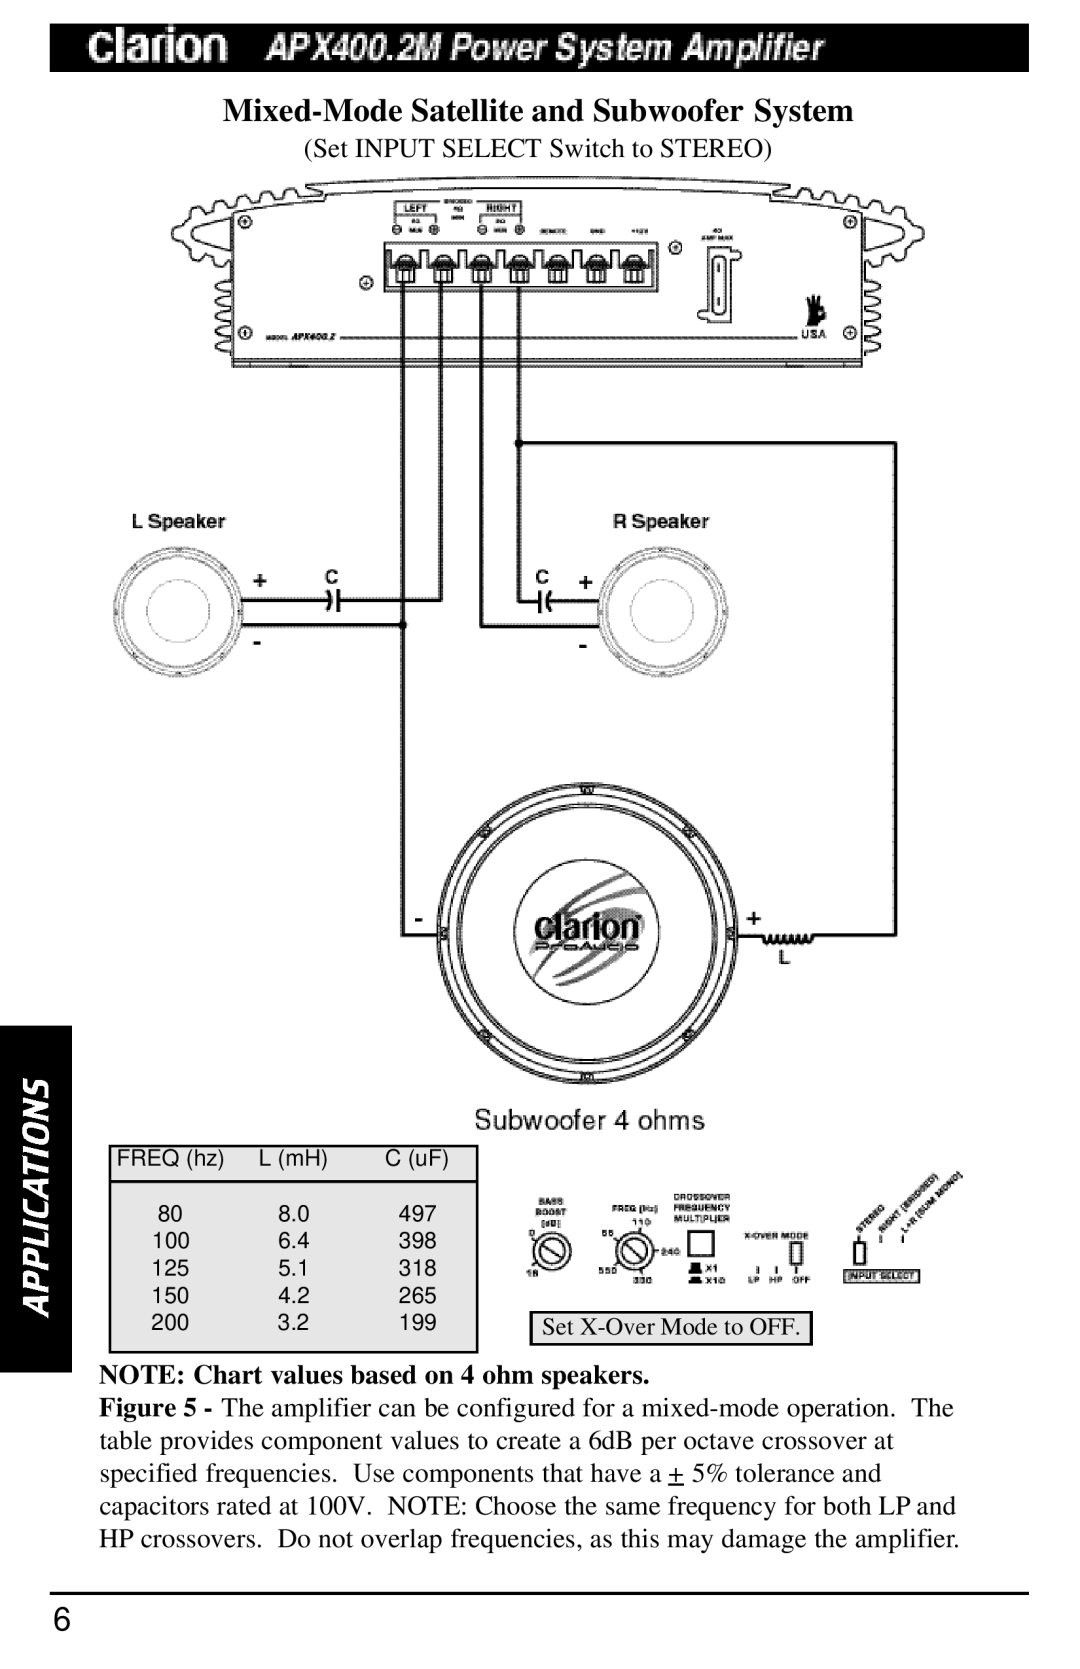 Clarion APX400.2M manual Mixed-ModeSatellite and Subwoofer System, NOTE Chart values based on 4 ohm speakers 